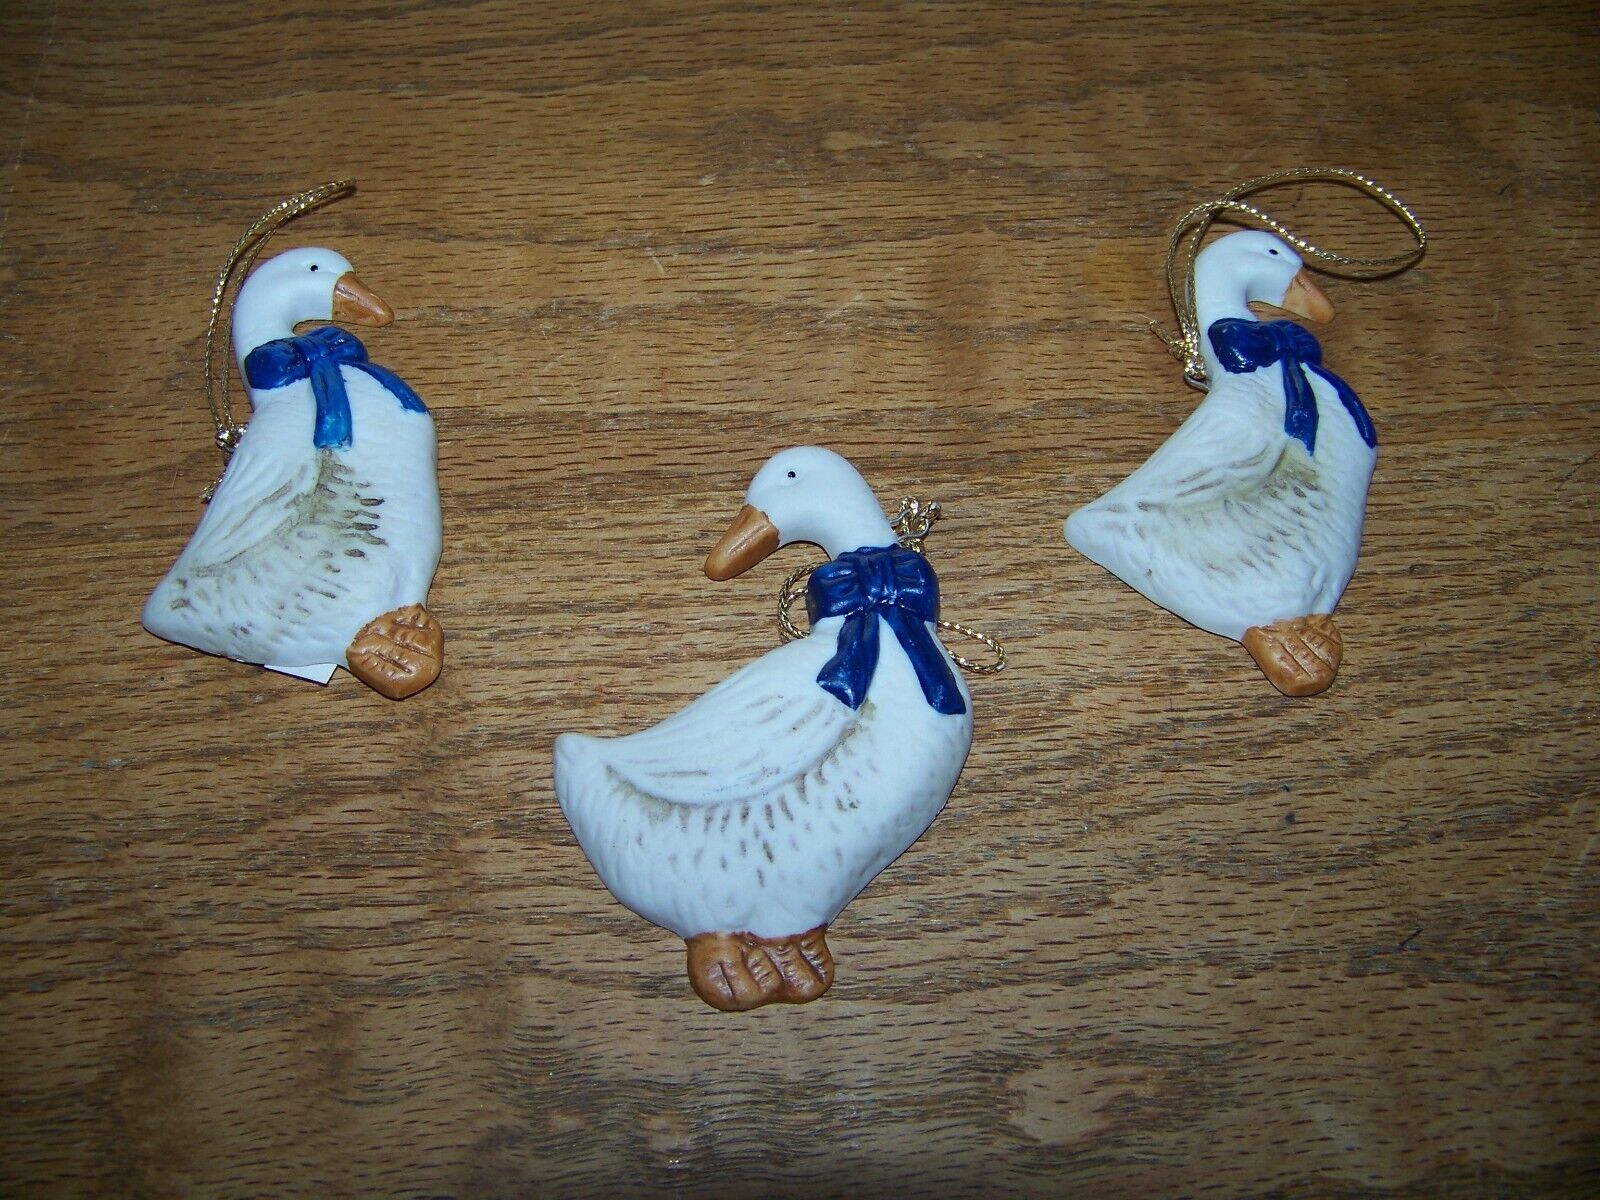 3 VTG WANG\'S INTL CERAMIC GEESE ORNAMENTS WHITE COUNTRY BLUE BOW R.O.C TAIWAN